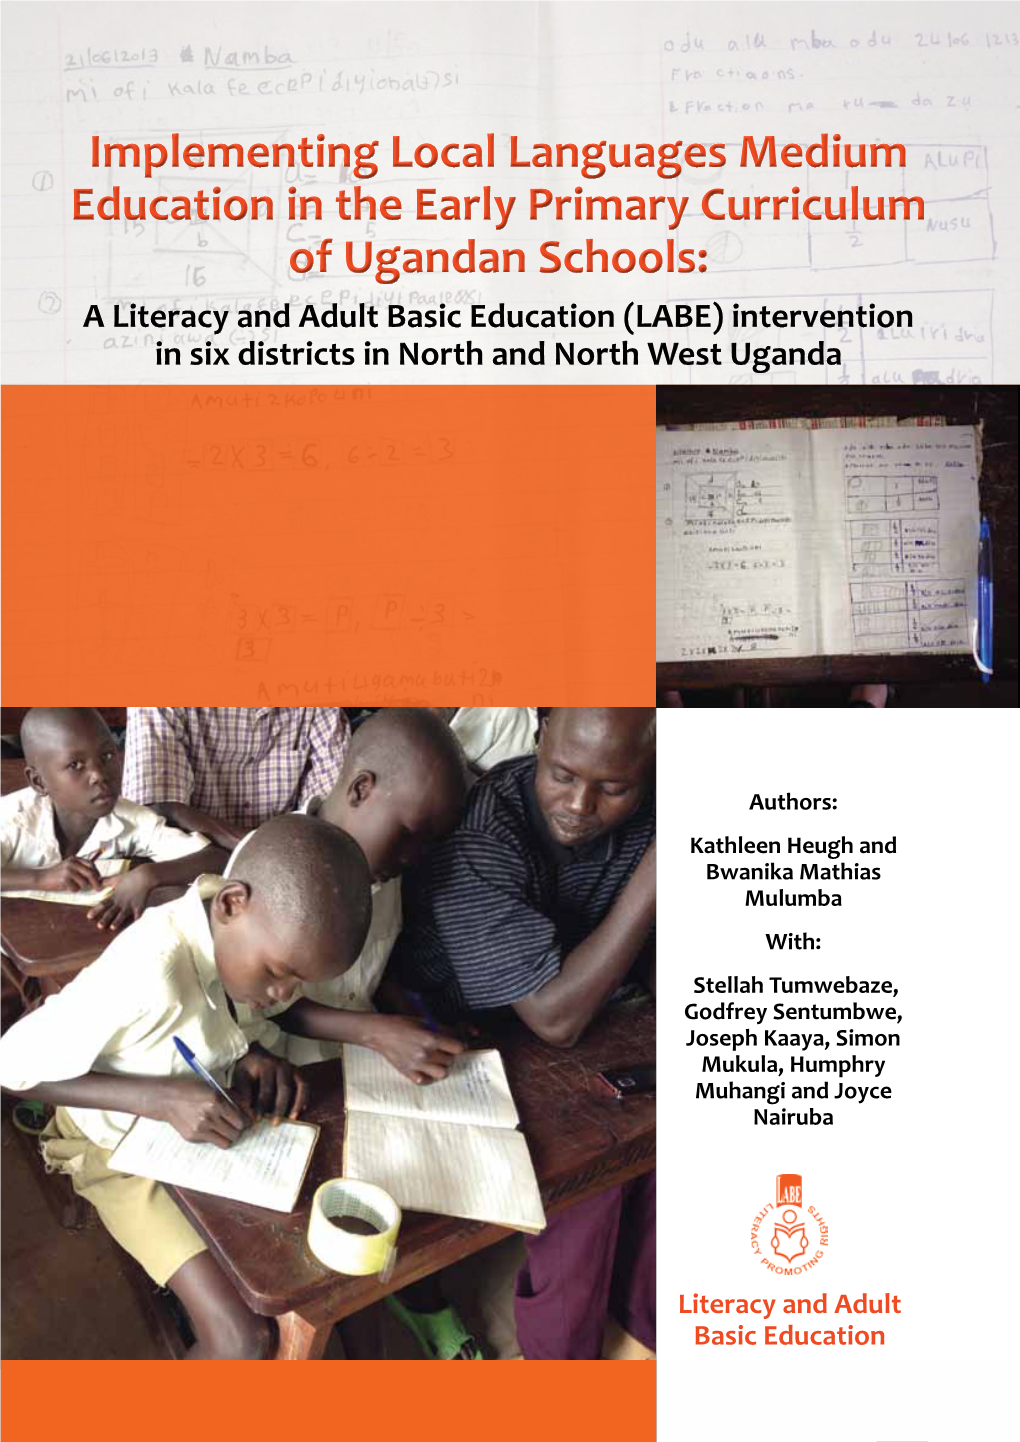 Implementing Local Languages Medium Education in the Early Primary Curriculum of Ugandan Schools